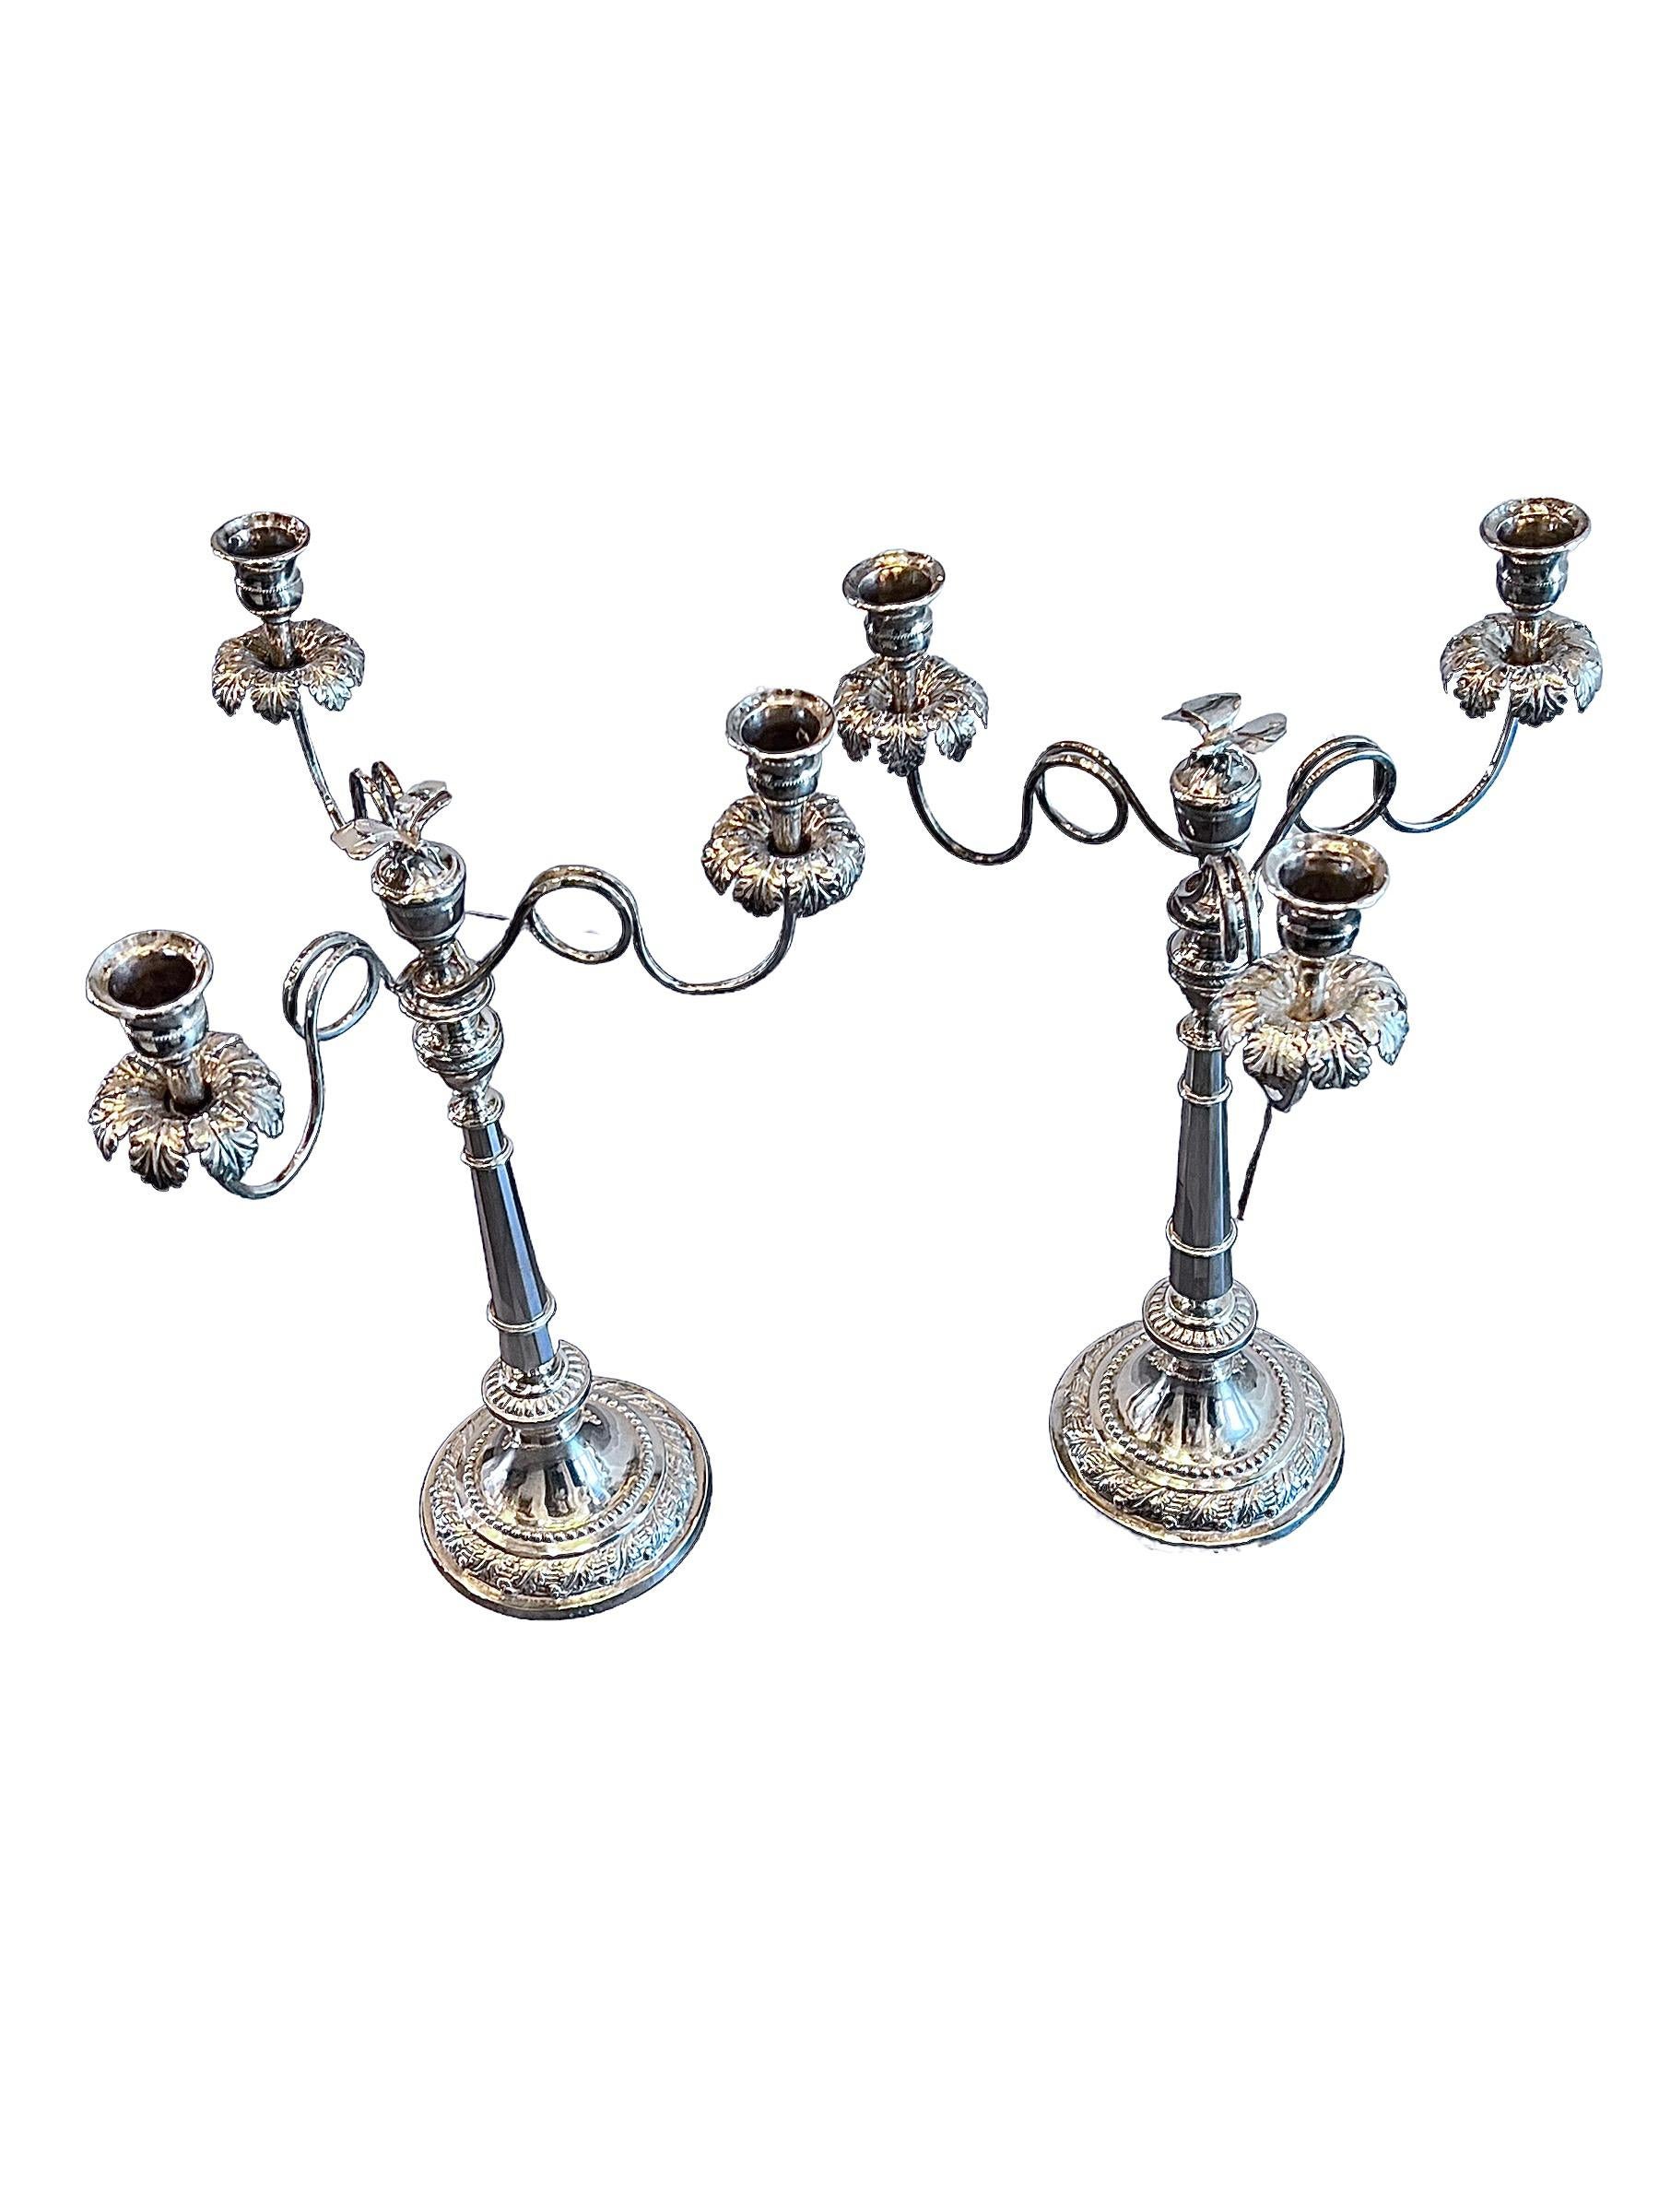 Exquisite Pair of 1820s Italian Touring (Grand Tour) Sterling Silver Candelabras

Crafted by skilled artisans, these magnificent candelabras hailing from 1820s Italy are a testament to the artistry of their era. Meticulously handcrafted and